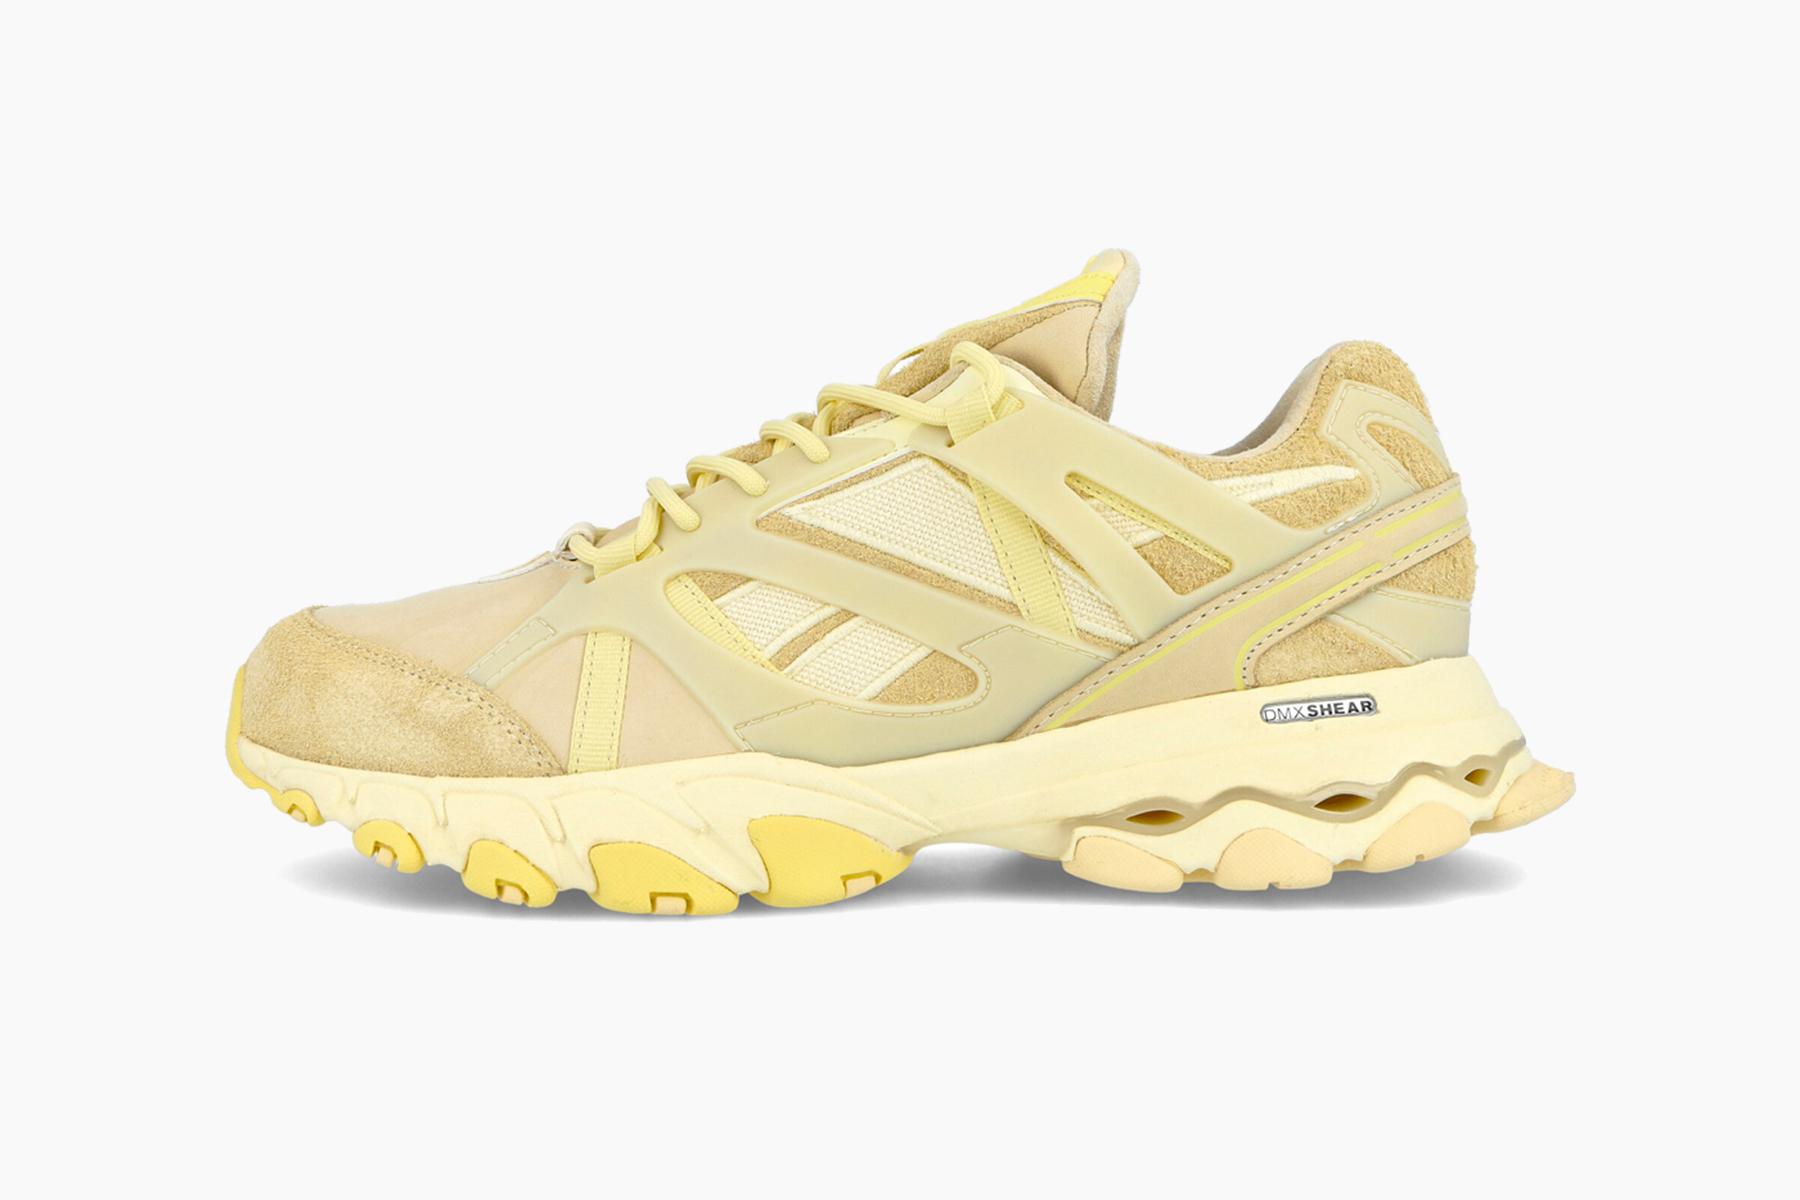 Reebok Trail Shadow "Washed Yellow/Filtered Yellow" | Hypebeast